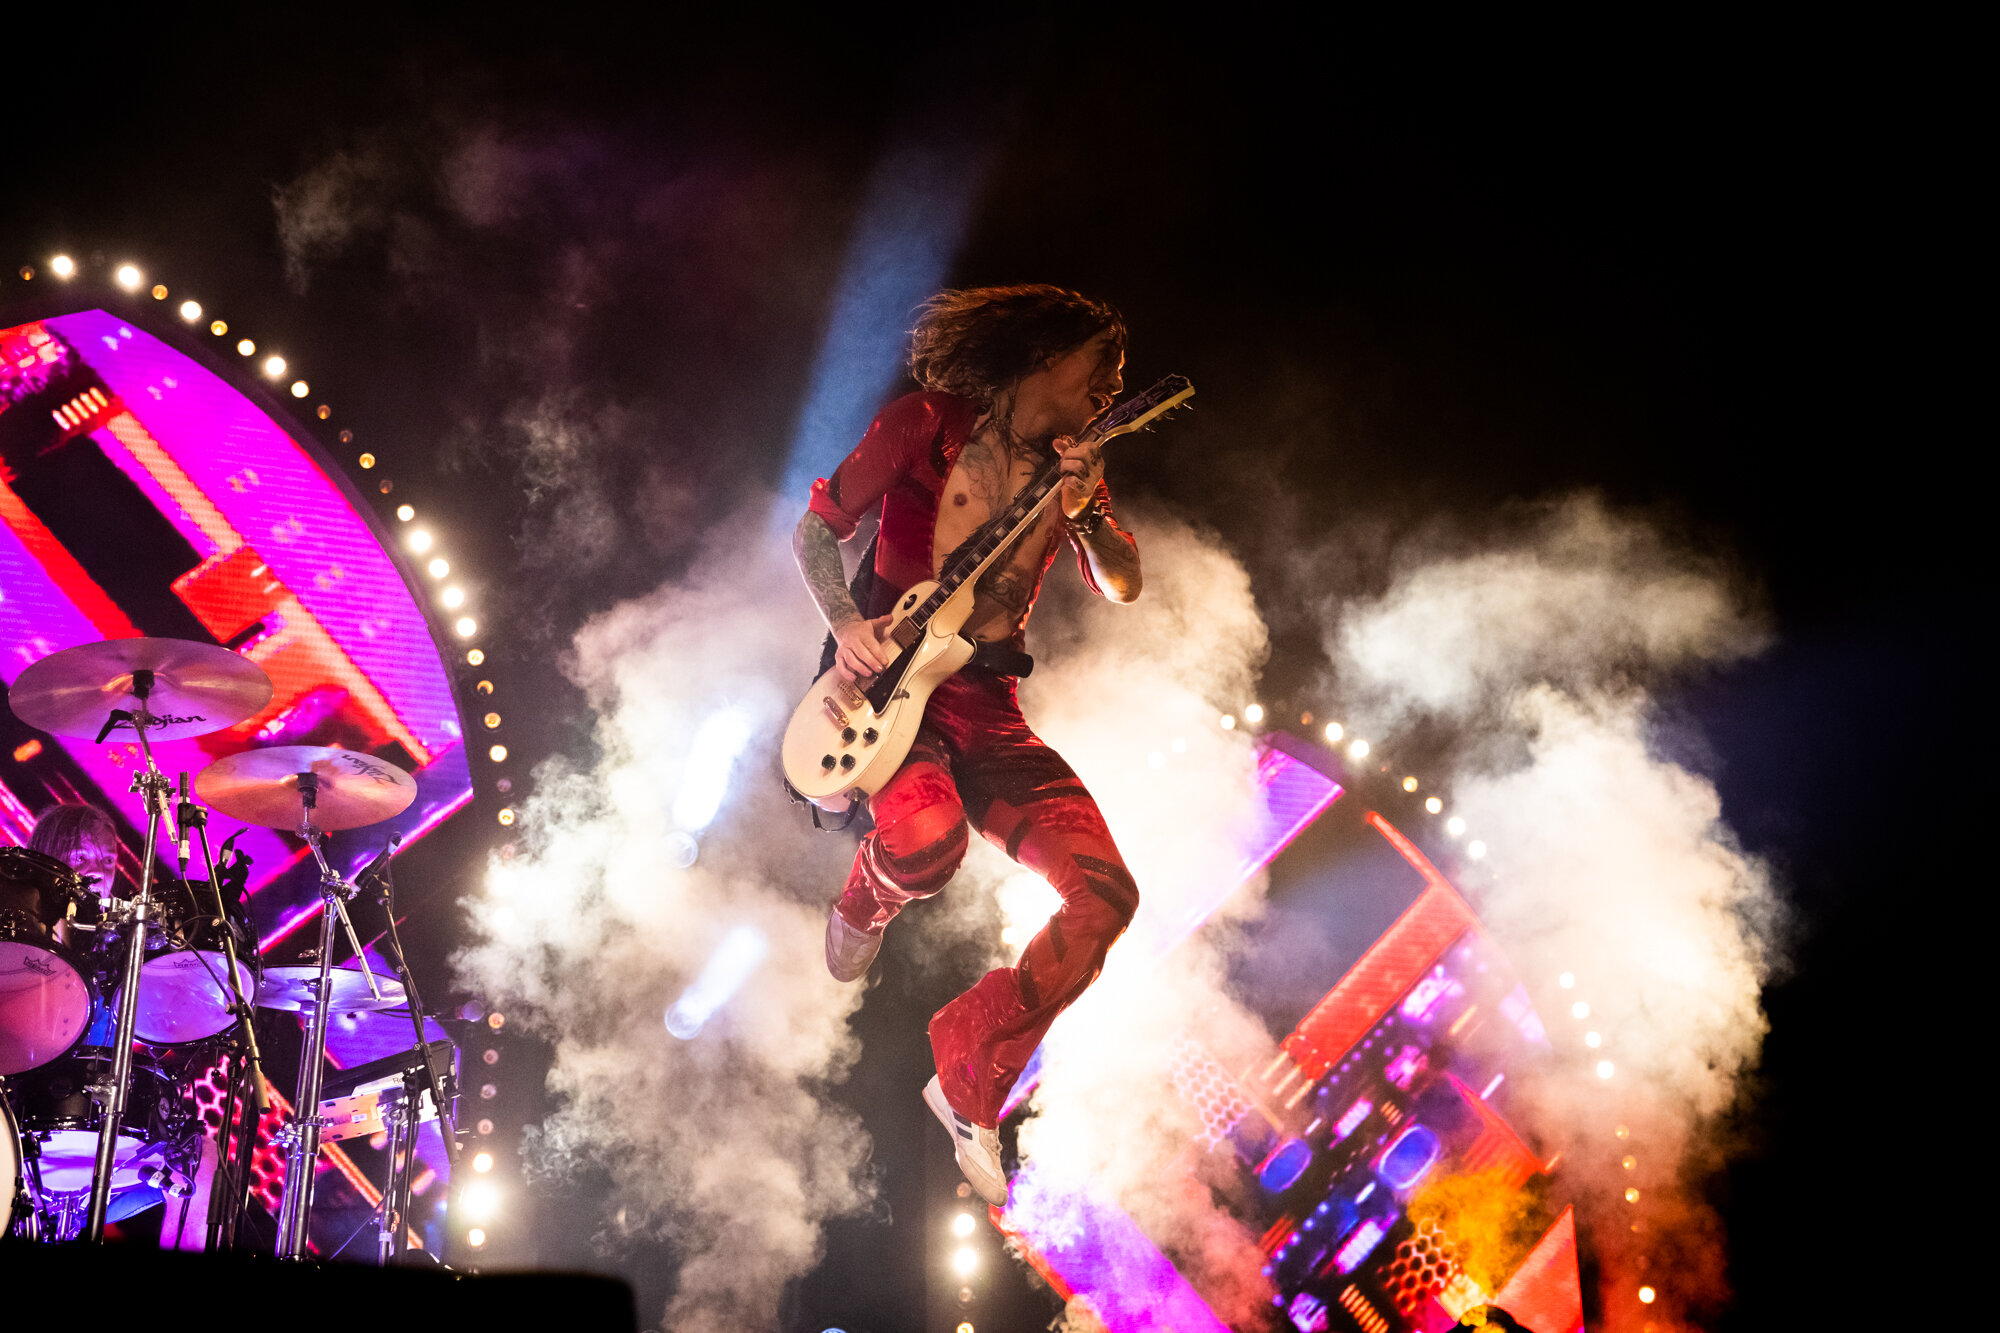 Justin Hawkins (The Darkness) by Gili Dailes